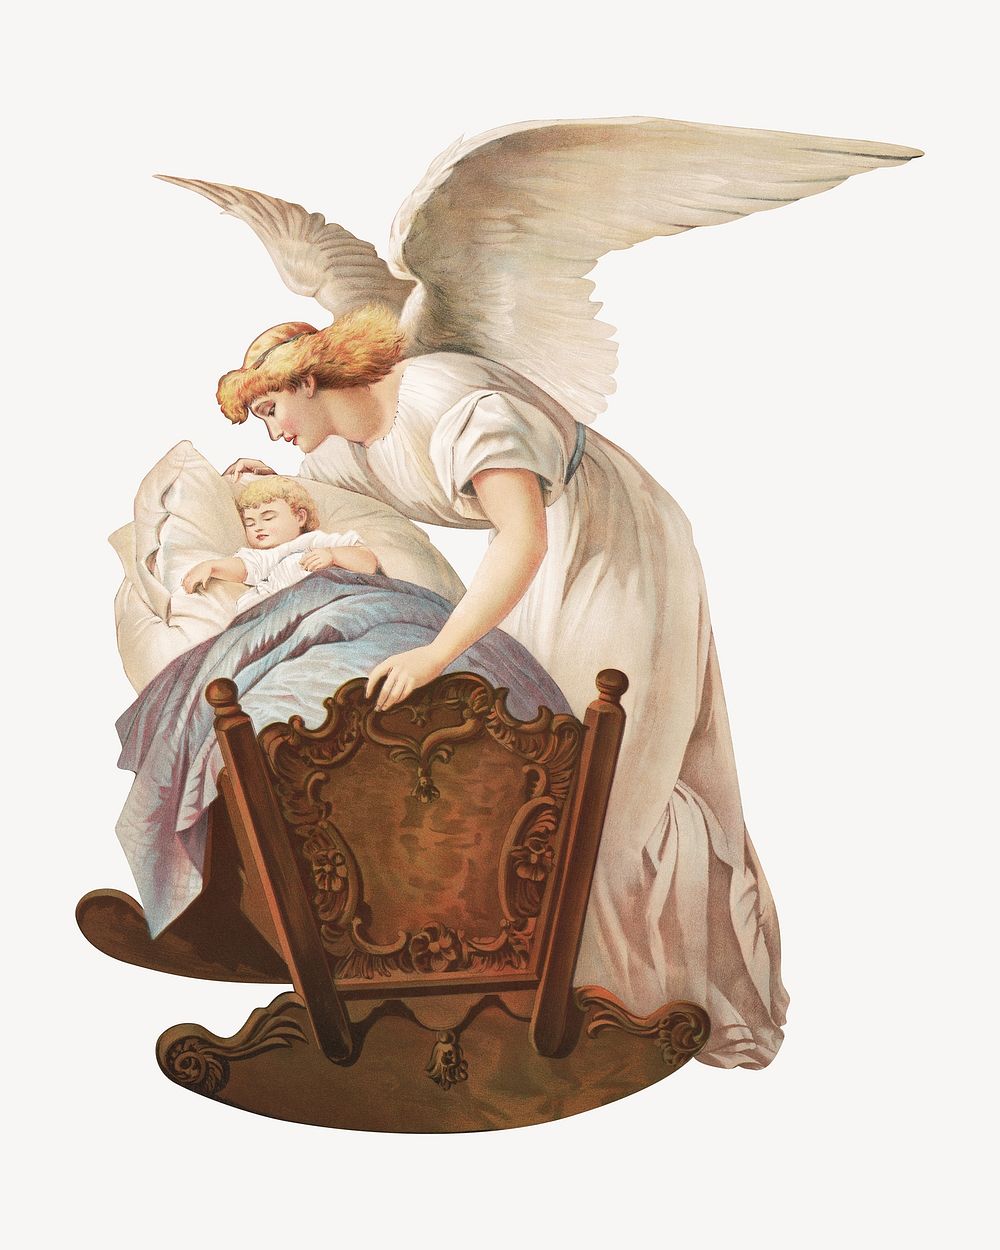 The angel's whisper, vintage illustration. Remixed by rawpixel.